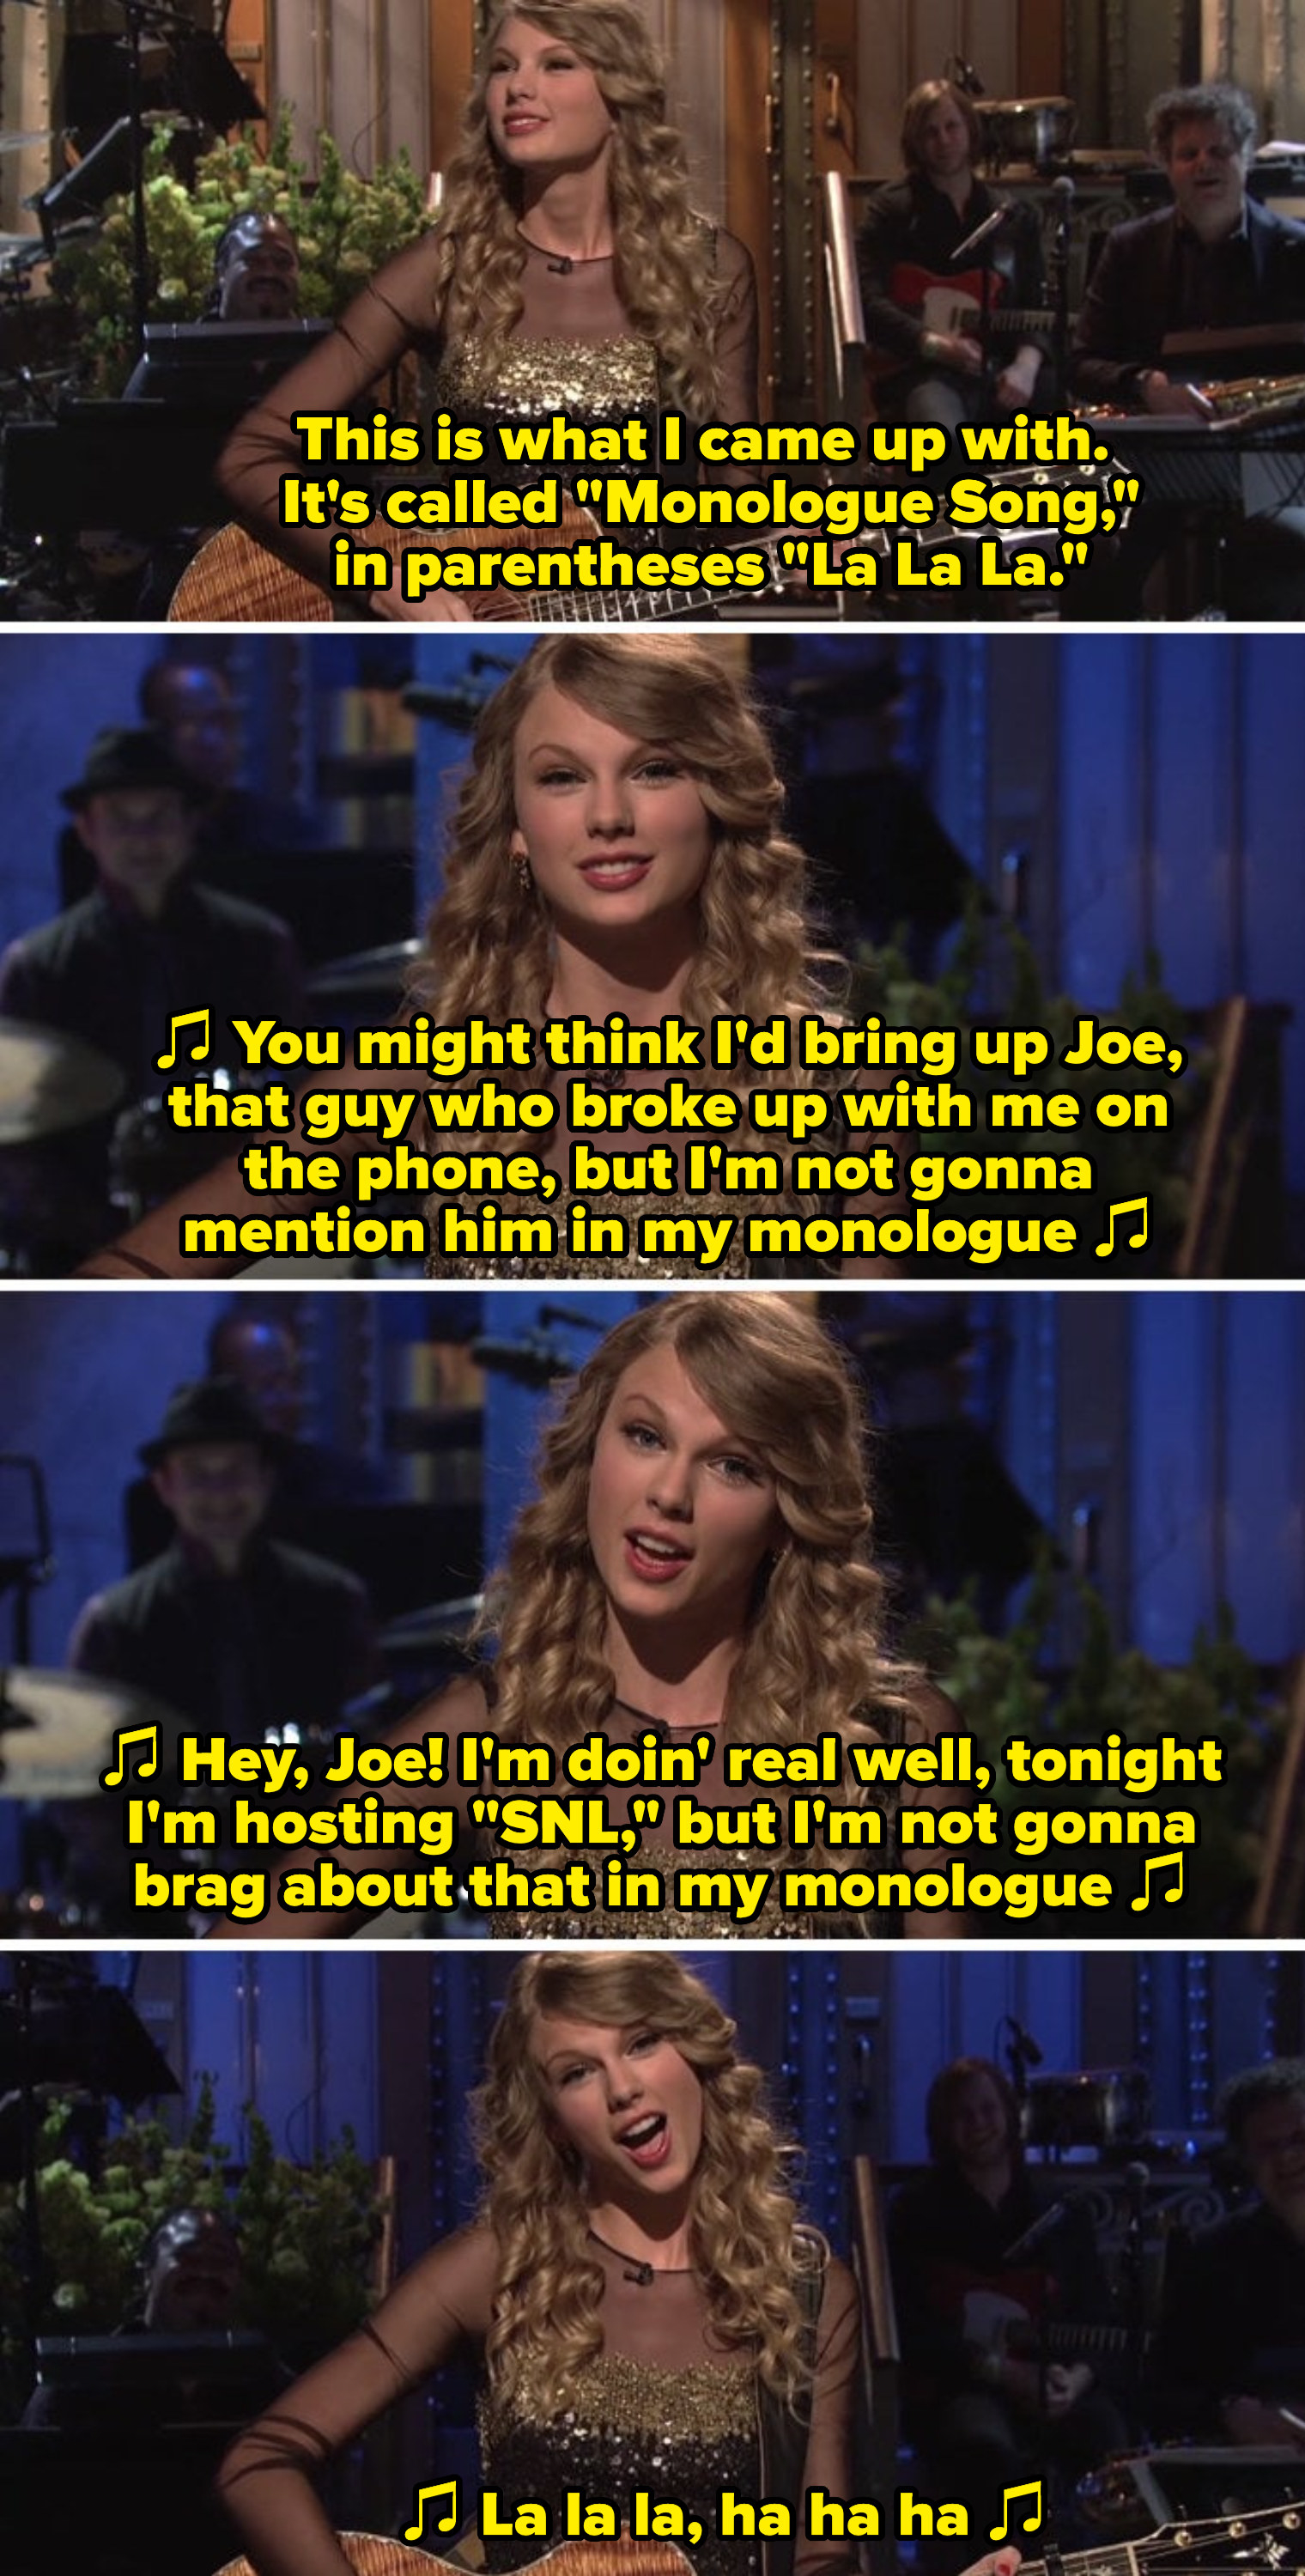 Taylor Swift singing about Joe Jonas during her &quot;SNL&quot; monologue